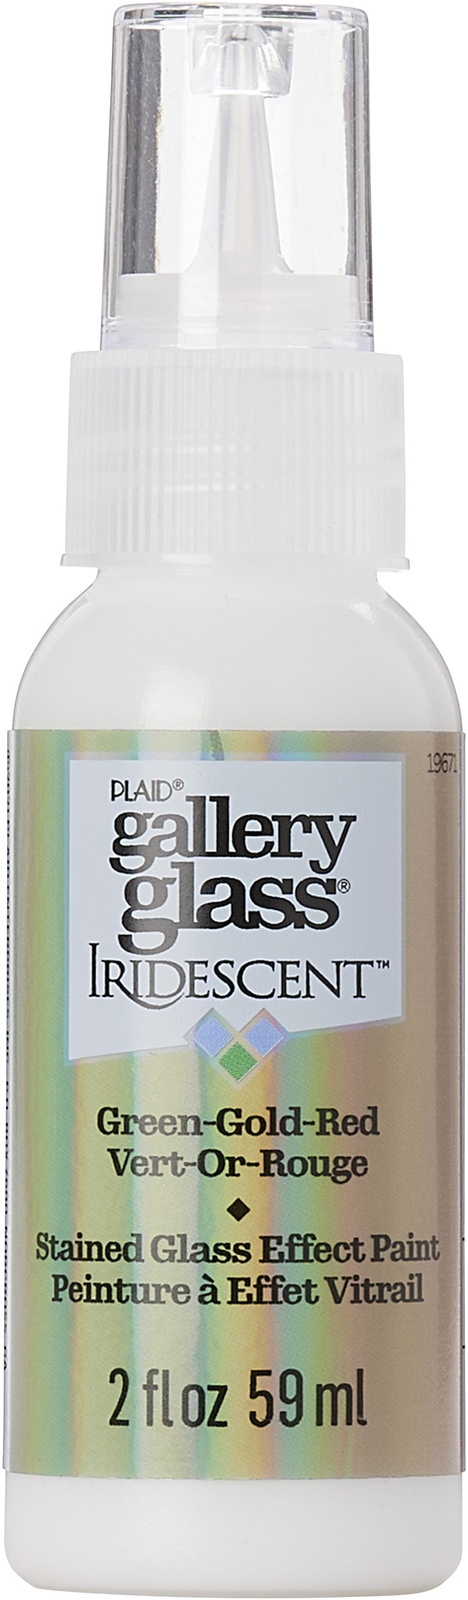 Primary image for FolkArt Gallery Glass Paint 2oz-Iridescent Green/Gold/Red